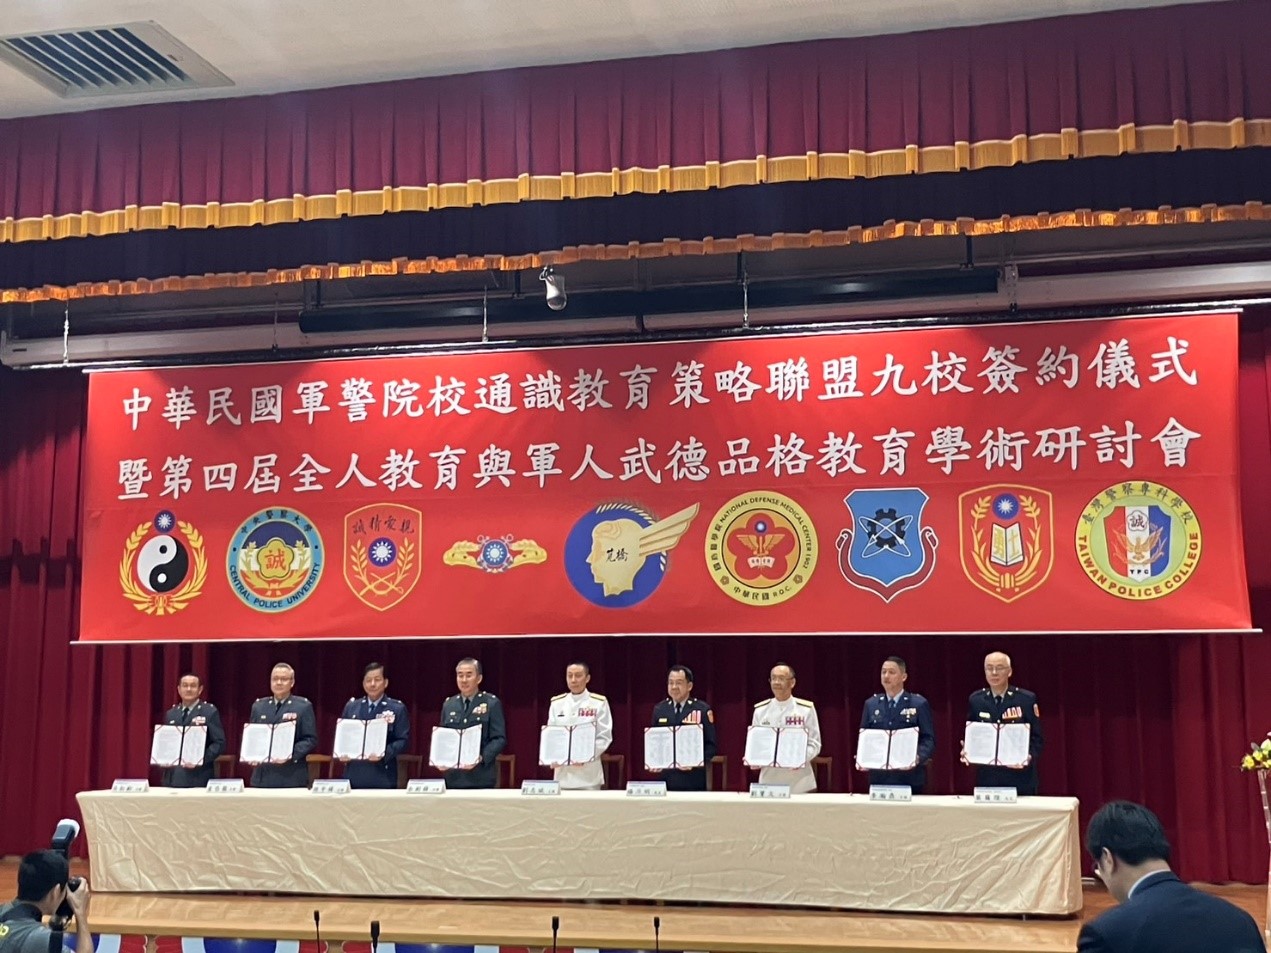 Nine Schools Strategic Alliance on General Education and the 4th Academic Seminar on Comprehensive Education, Military Morality and Character Educatio